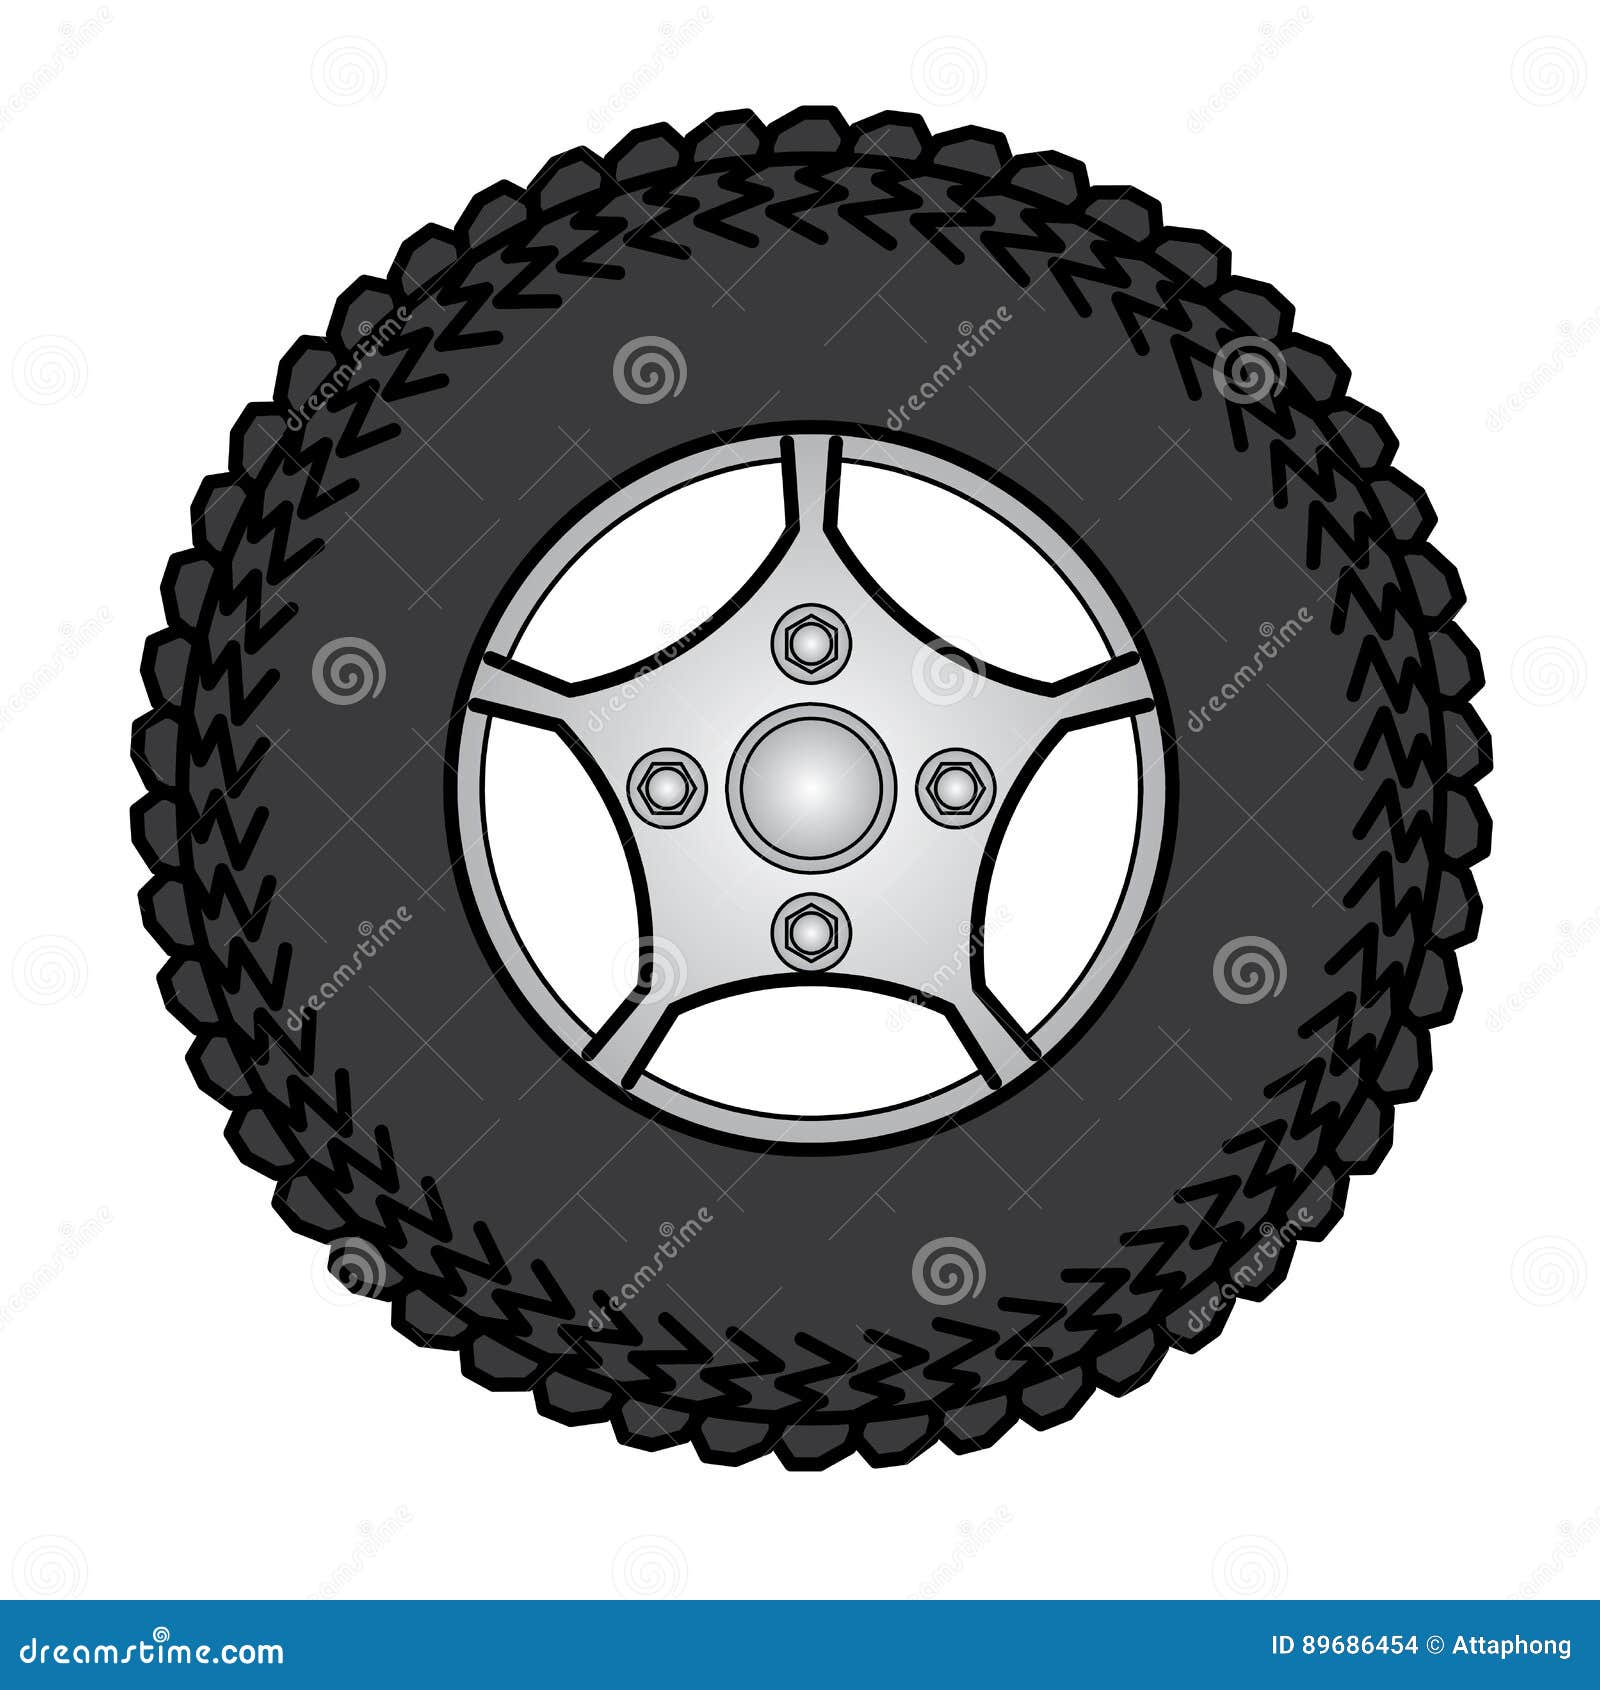 Tires and Wheels Vector Illustration Stock Vector - Illustration of ...